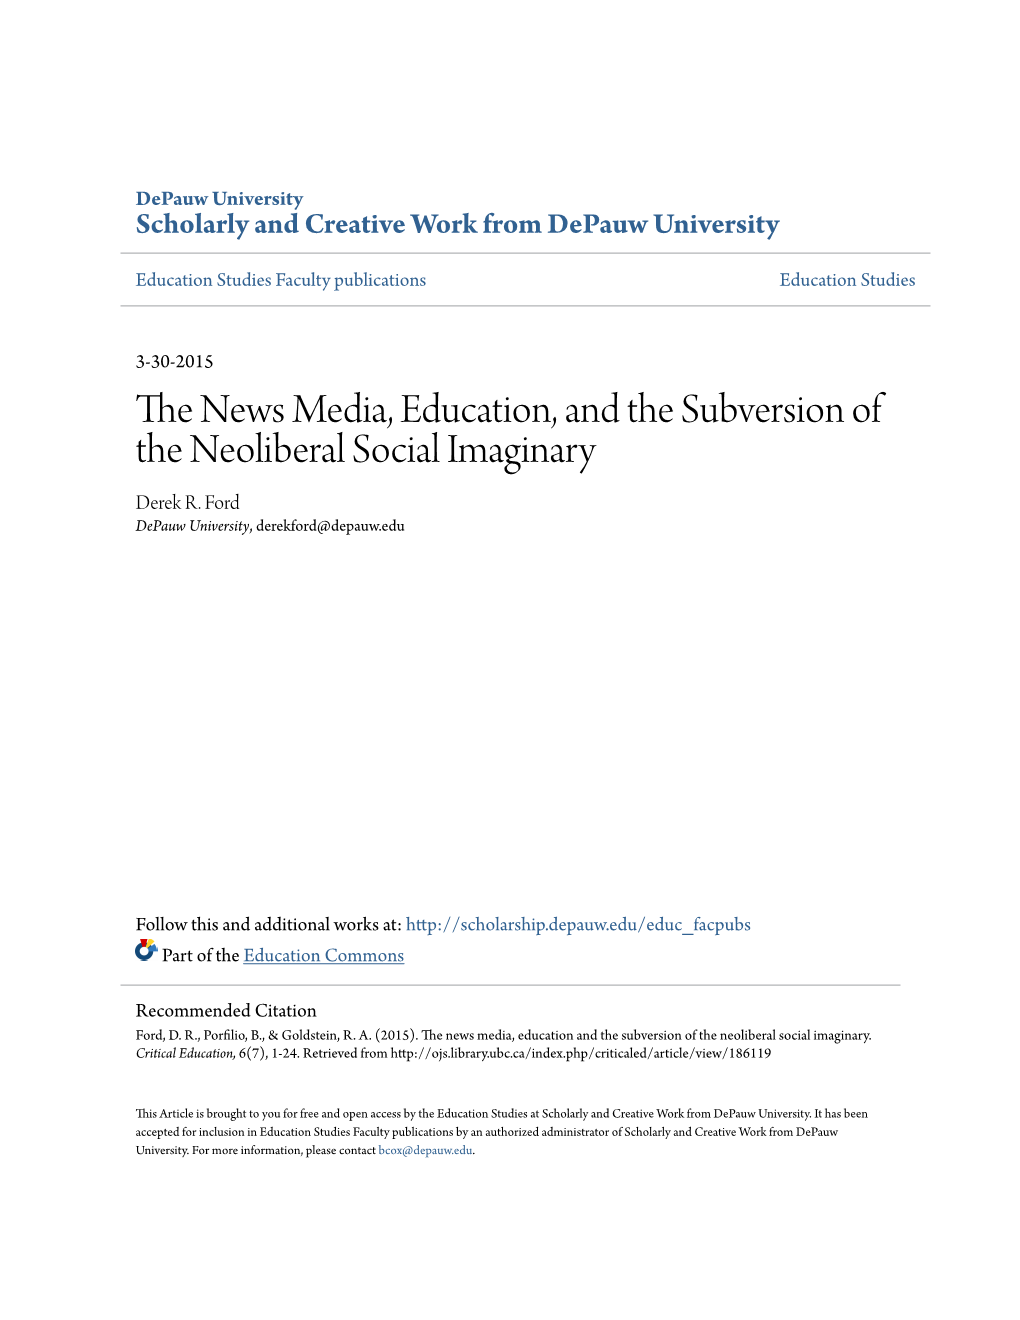 The News Media, Education, and the Subversion of the Neoliberal Social Imaginary